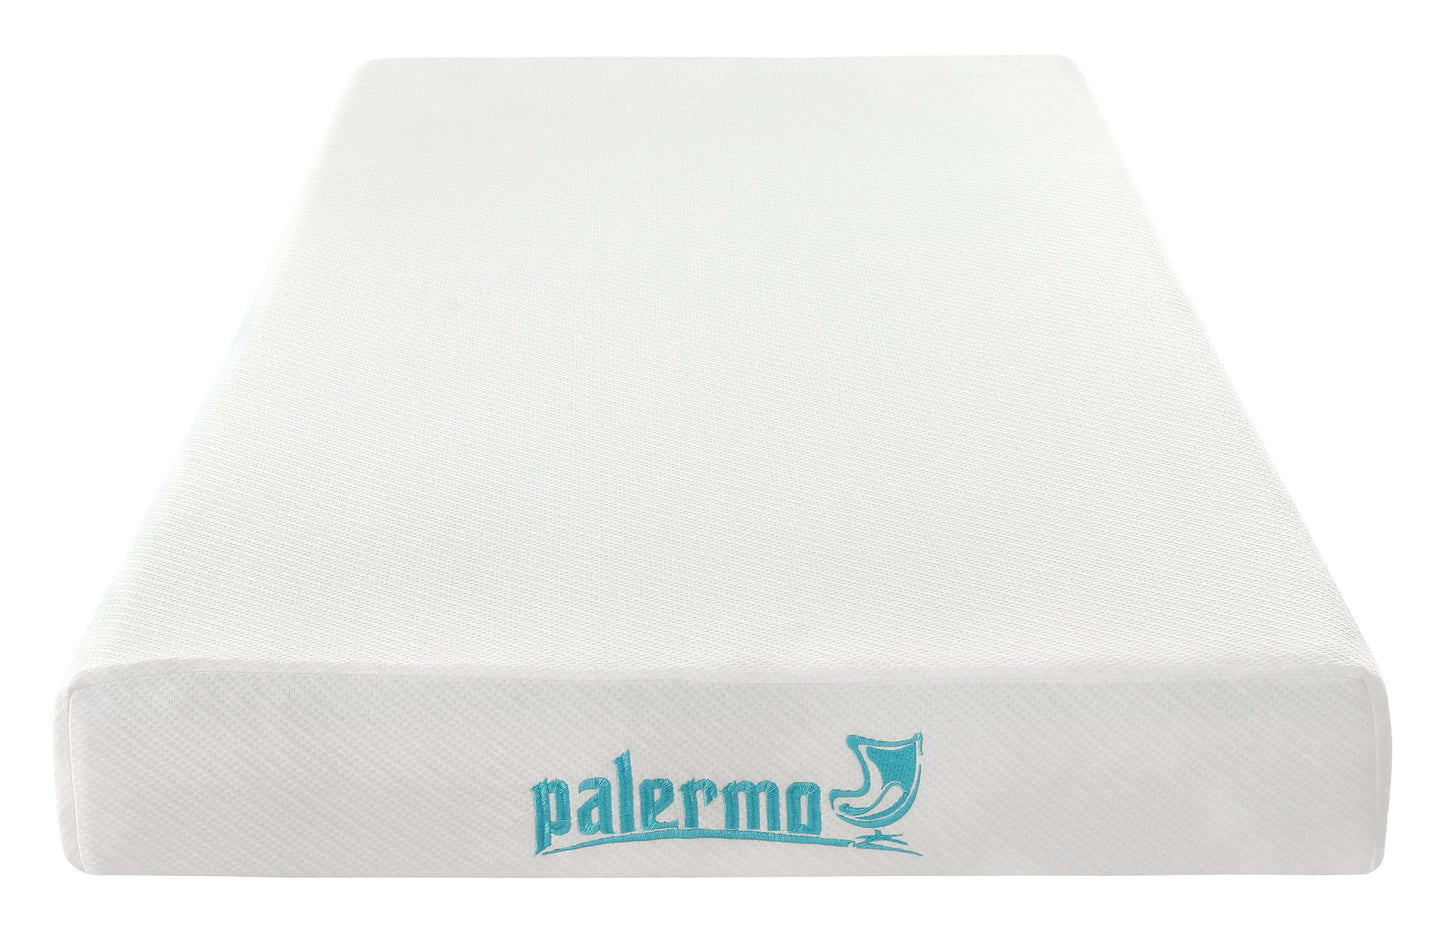 Palermo Single Mattress Memory Foam Green Tea Infused CertiPUR Approved - image2